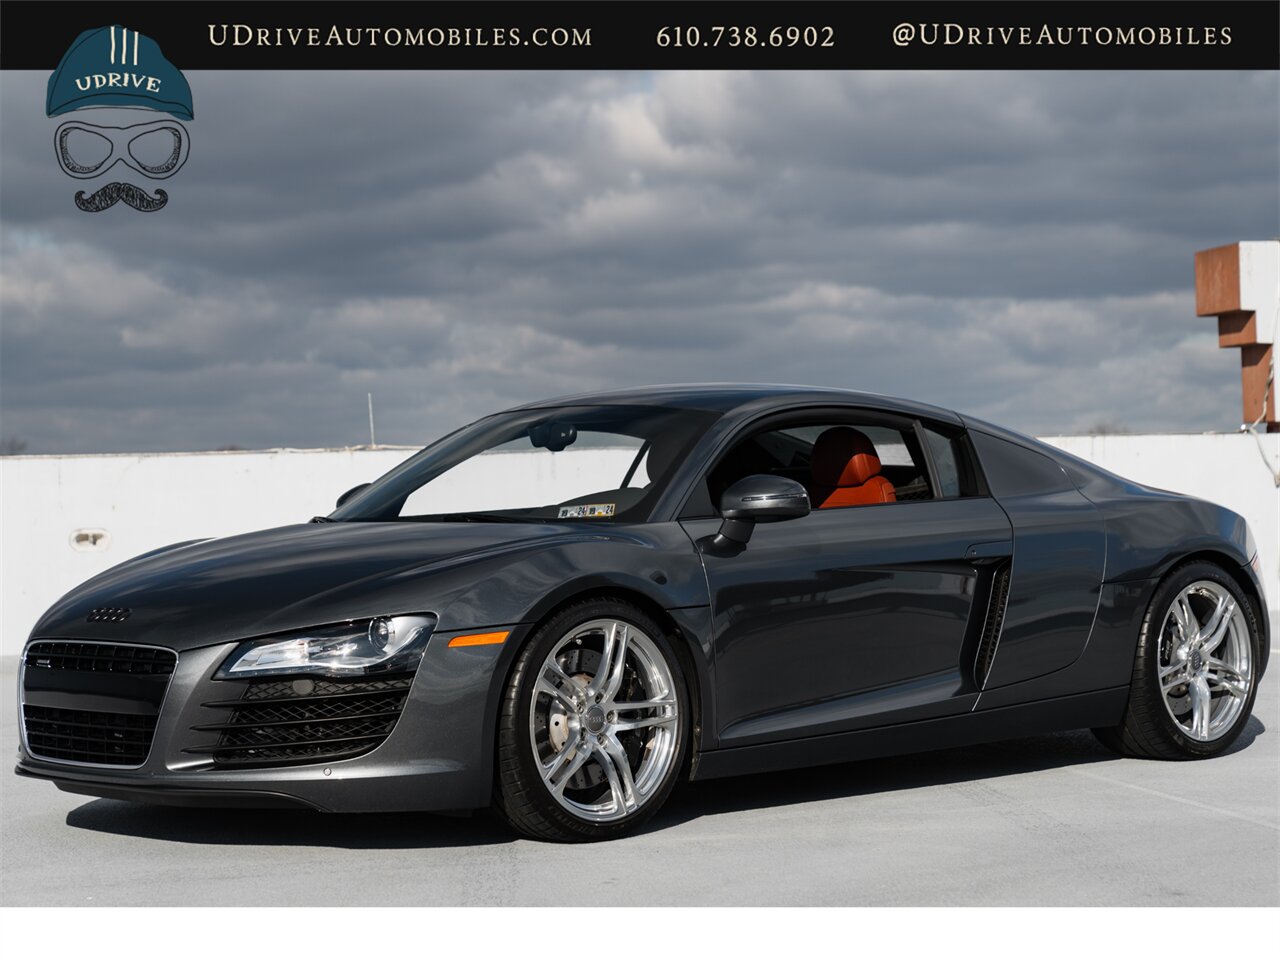 2009 Audi R8 Quattro  4.2 V8 6 Speed Manual 15k Miles - Photo 13 - West Chester, PA 19382